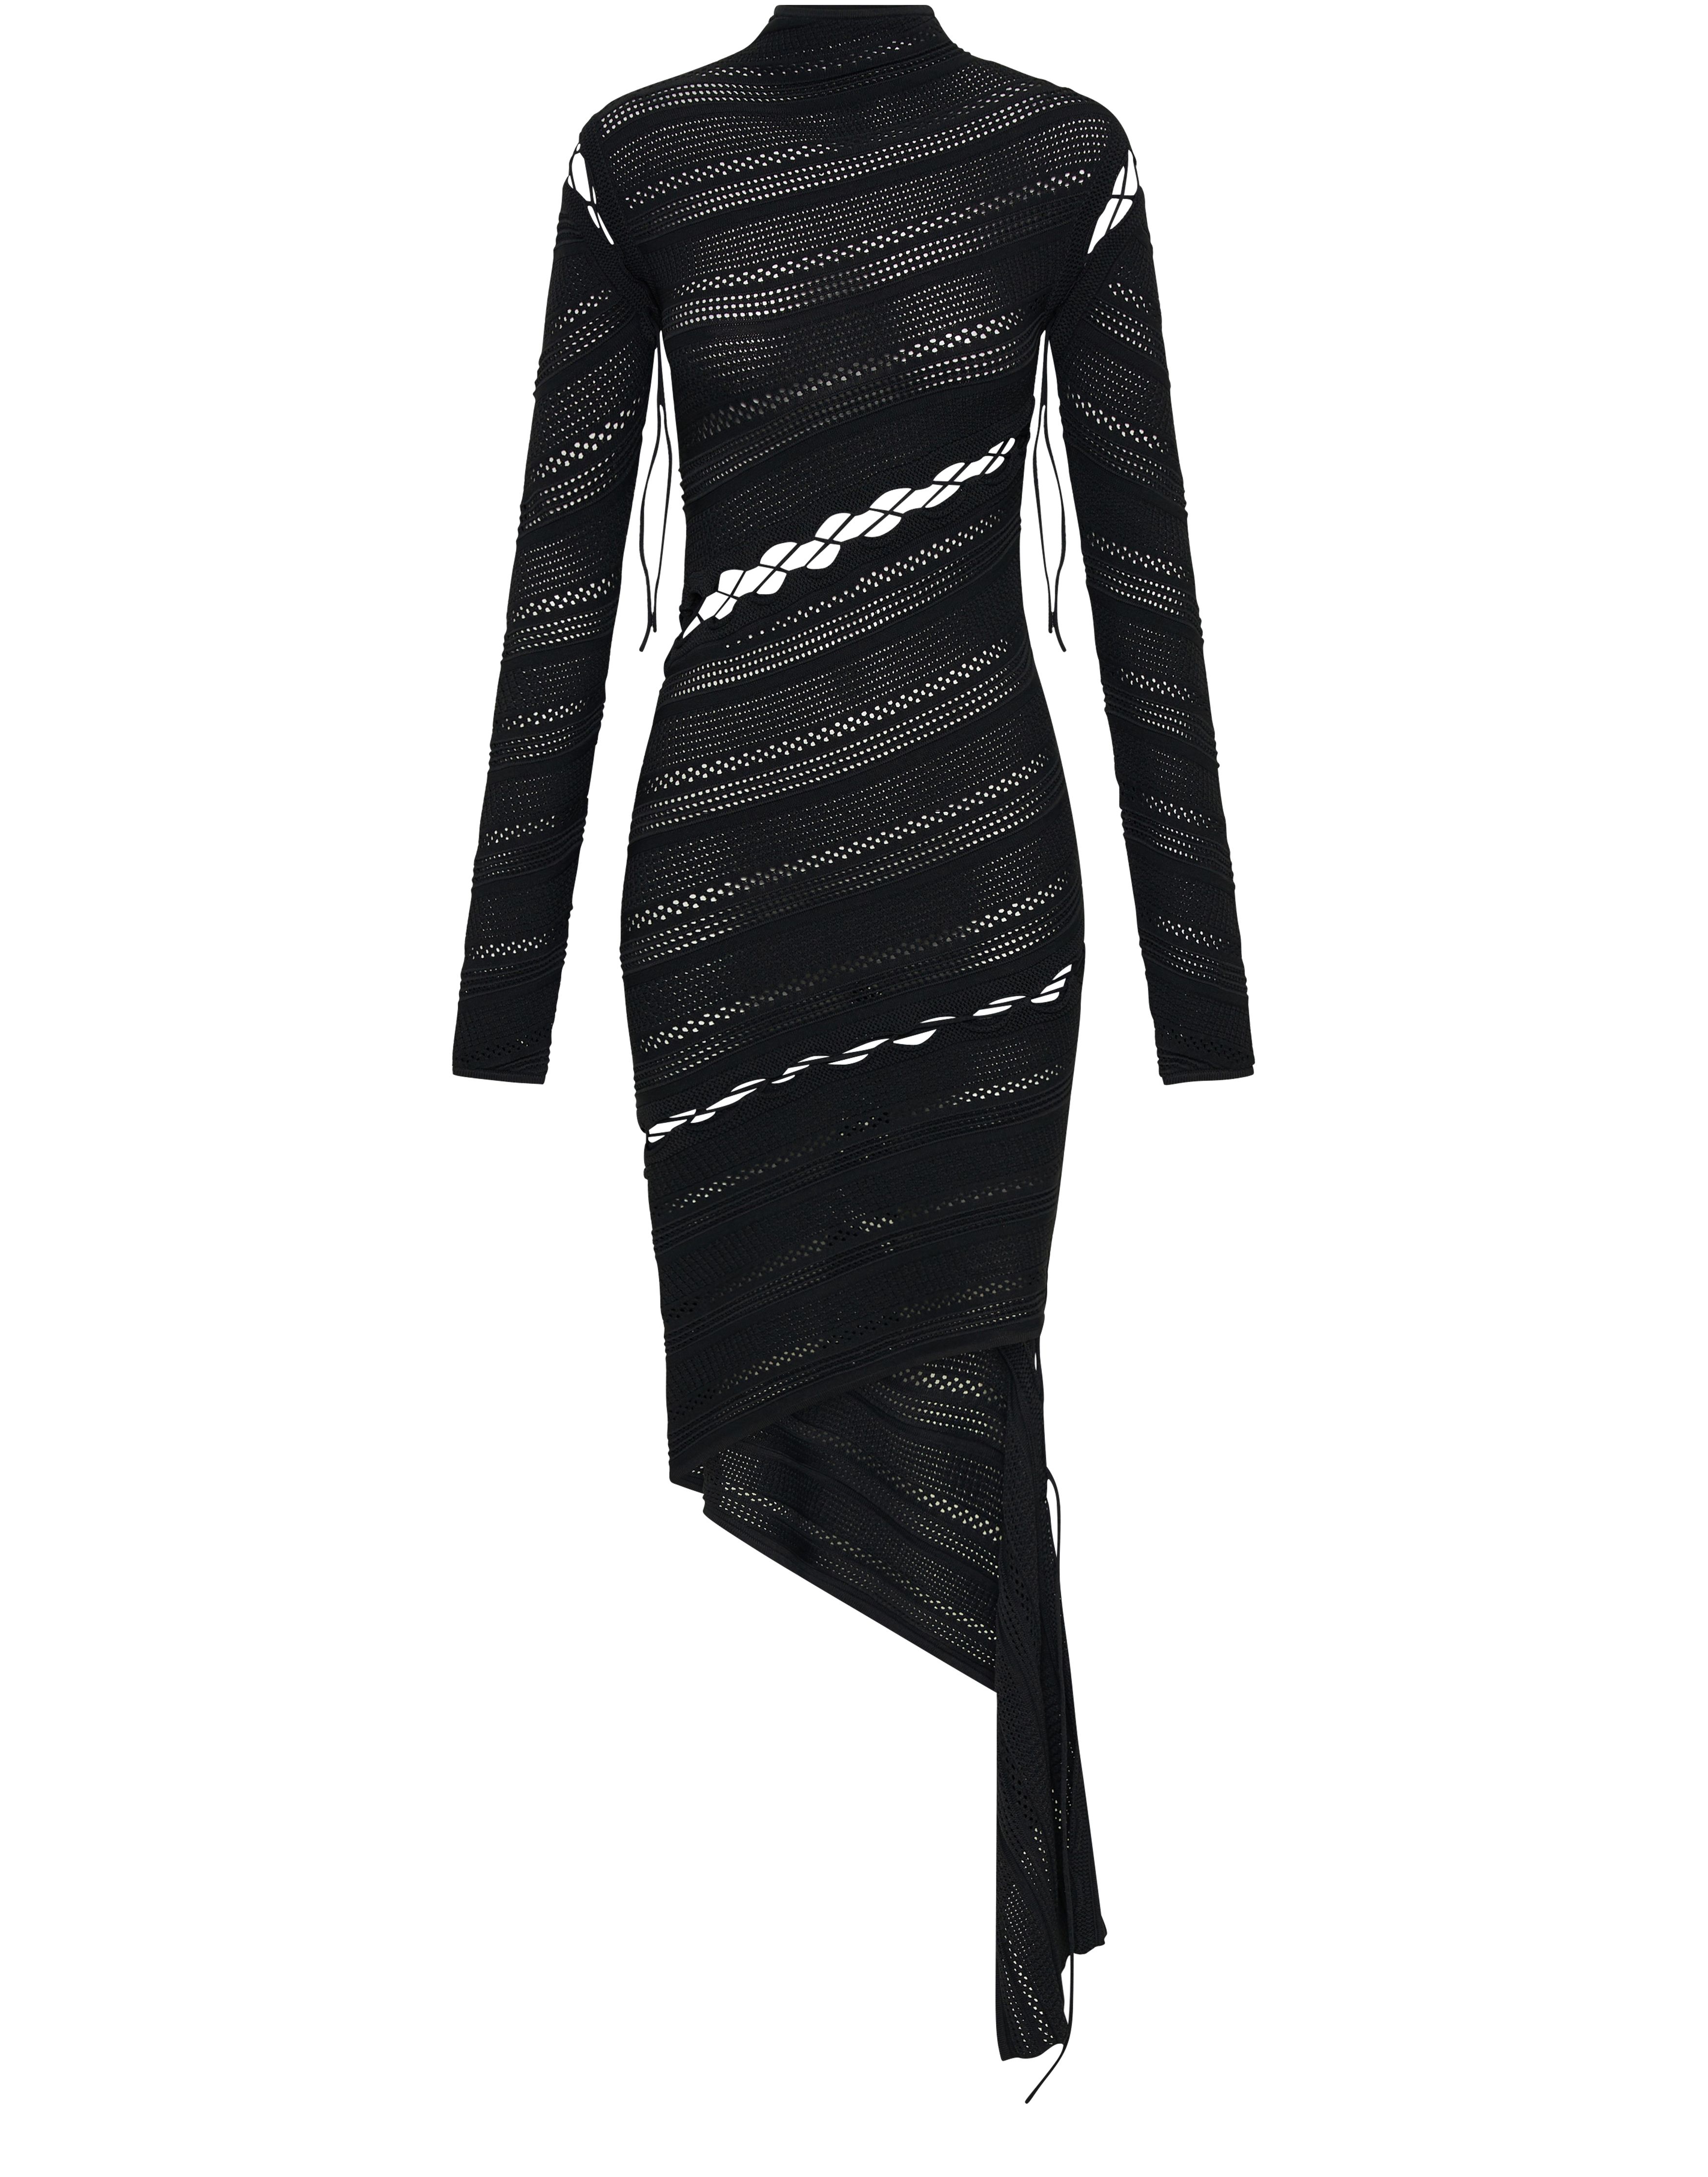 Dion Lee Coiling Openwork Dress